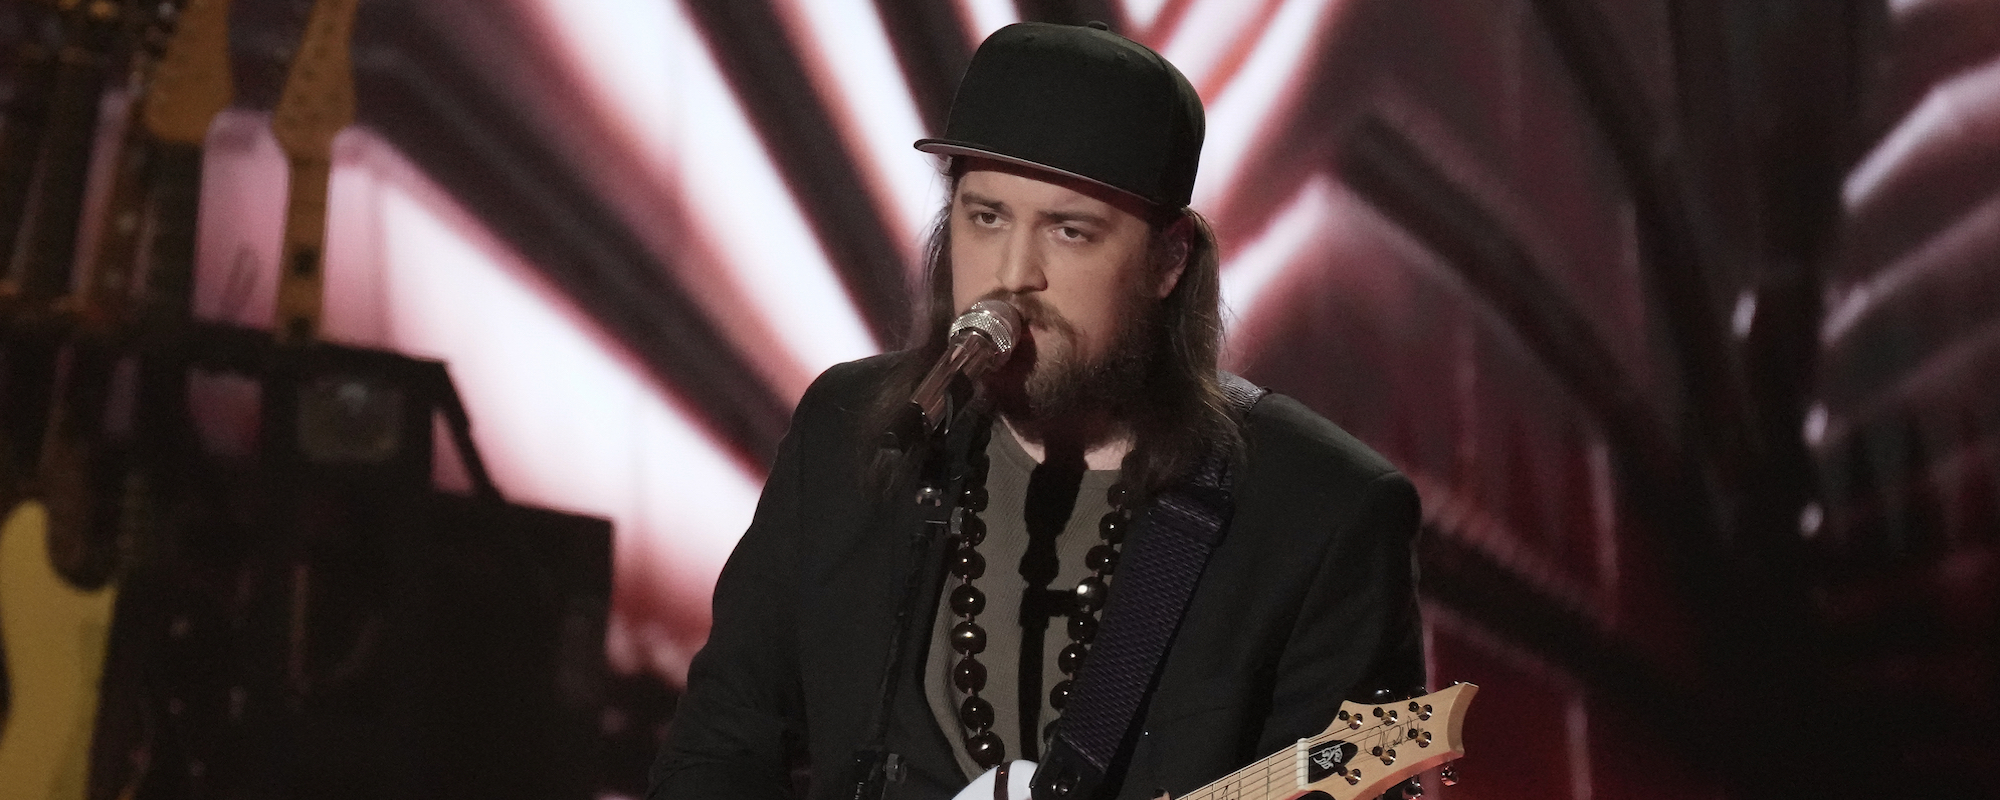 Oliver Steele Stuns ‘American Idol’ Judges with Moving Original “Too Soon”